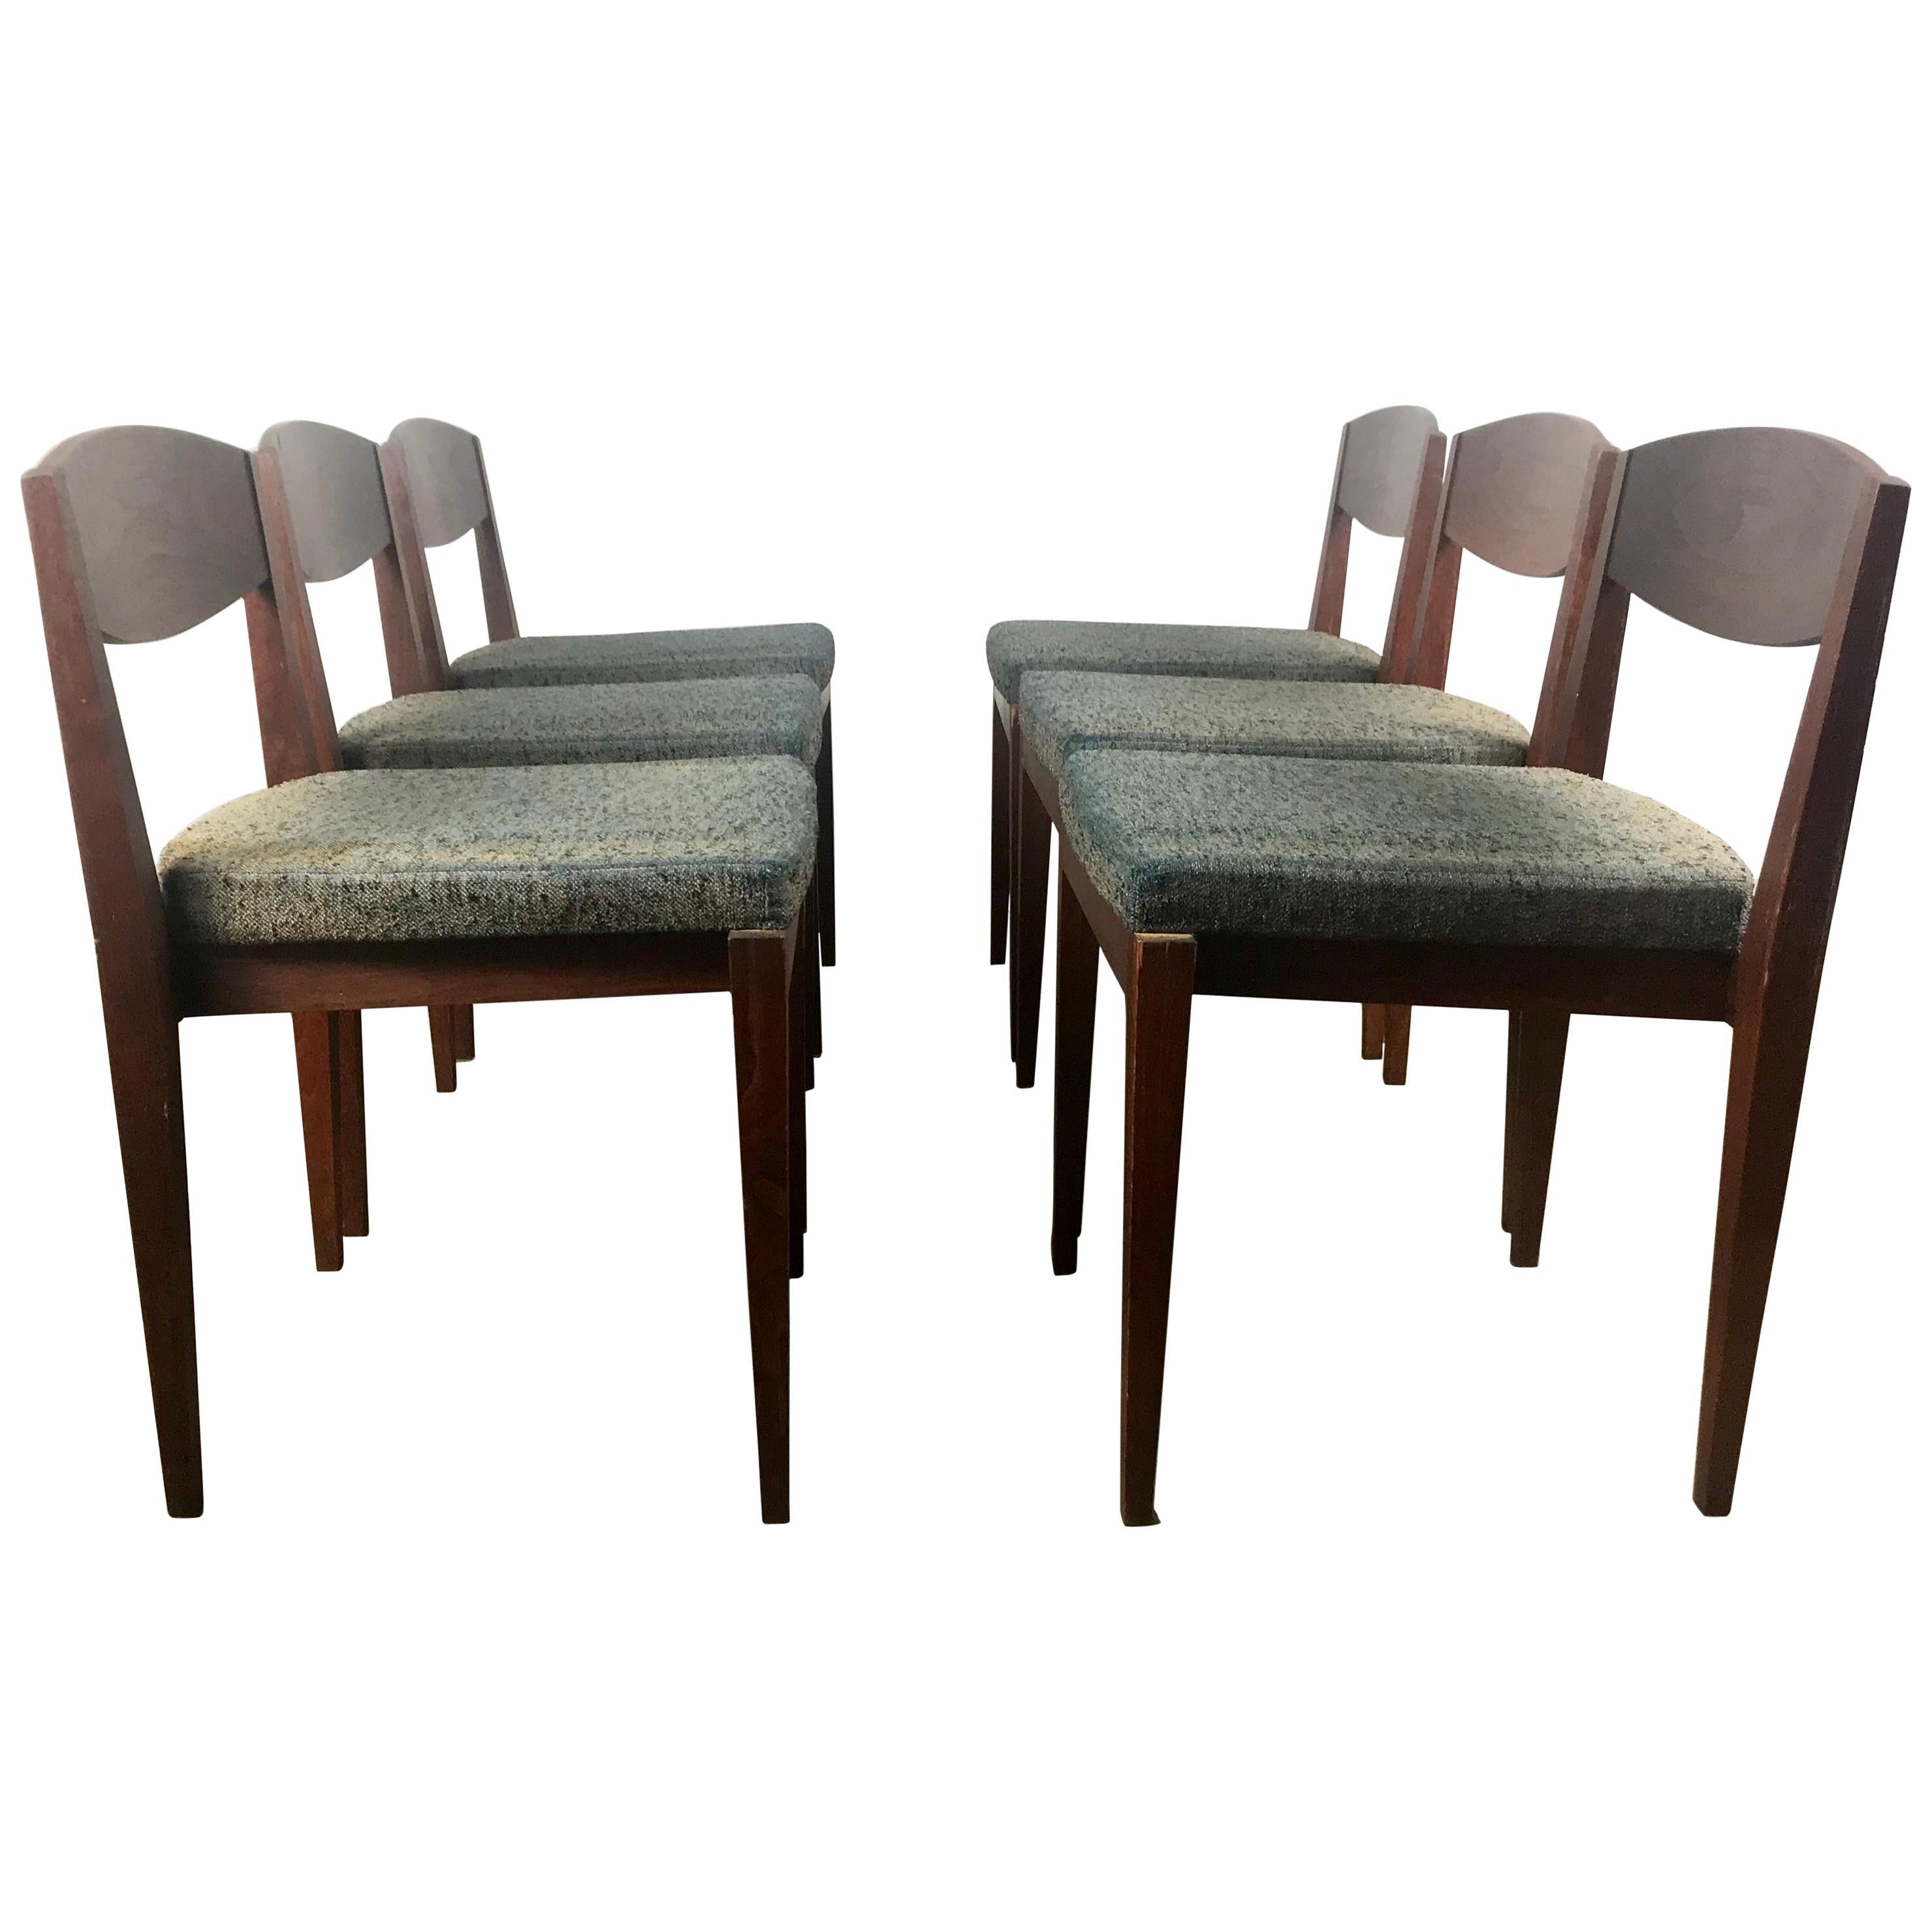 Unusual Set of 6 American Modernist Dining Chairs, Architectural Design